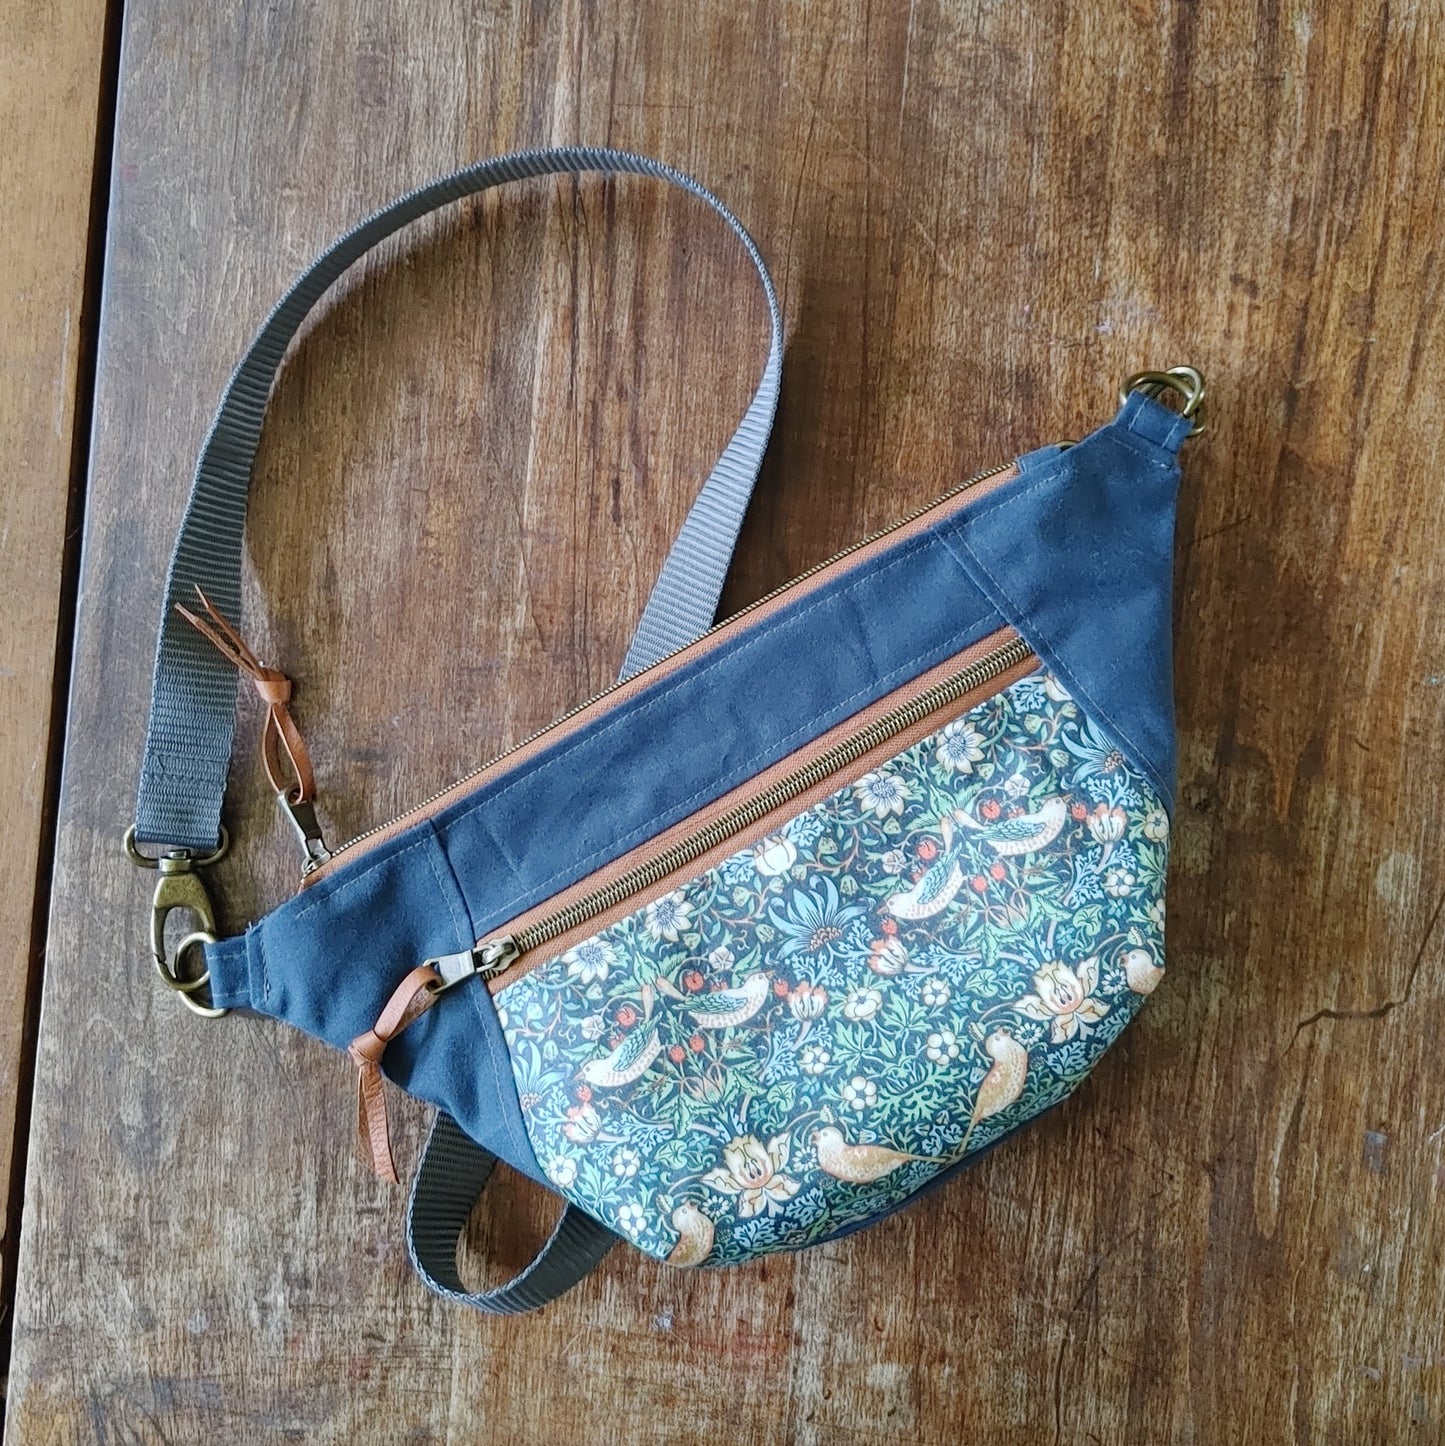 Handbag in Strawberry Thief by William Morris print and waxed canvas. Made in Canada by Plumage Studio Accessories